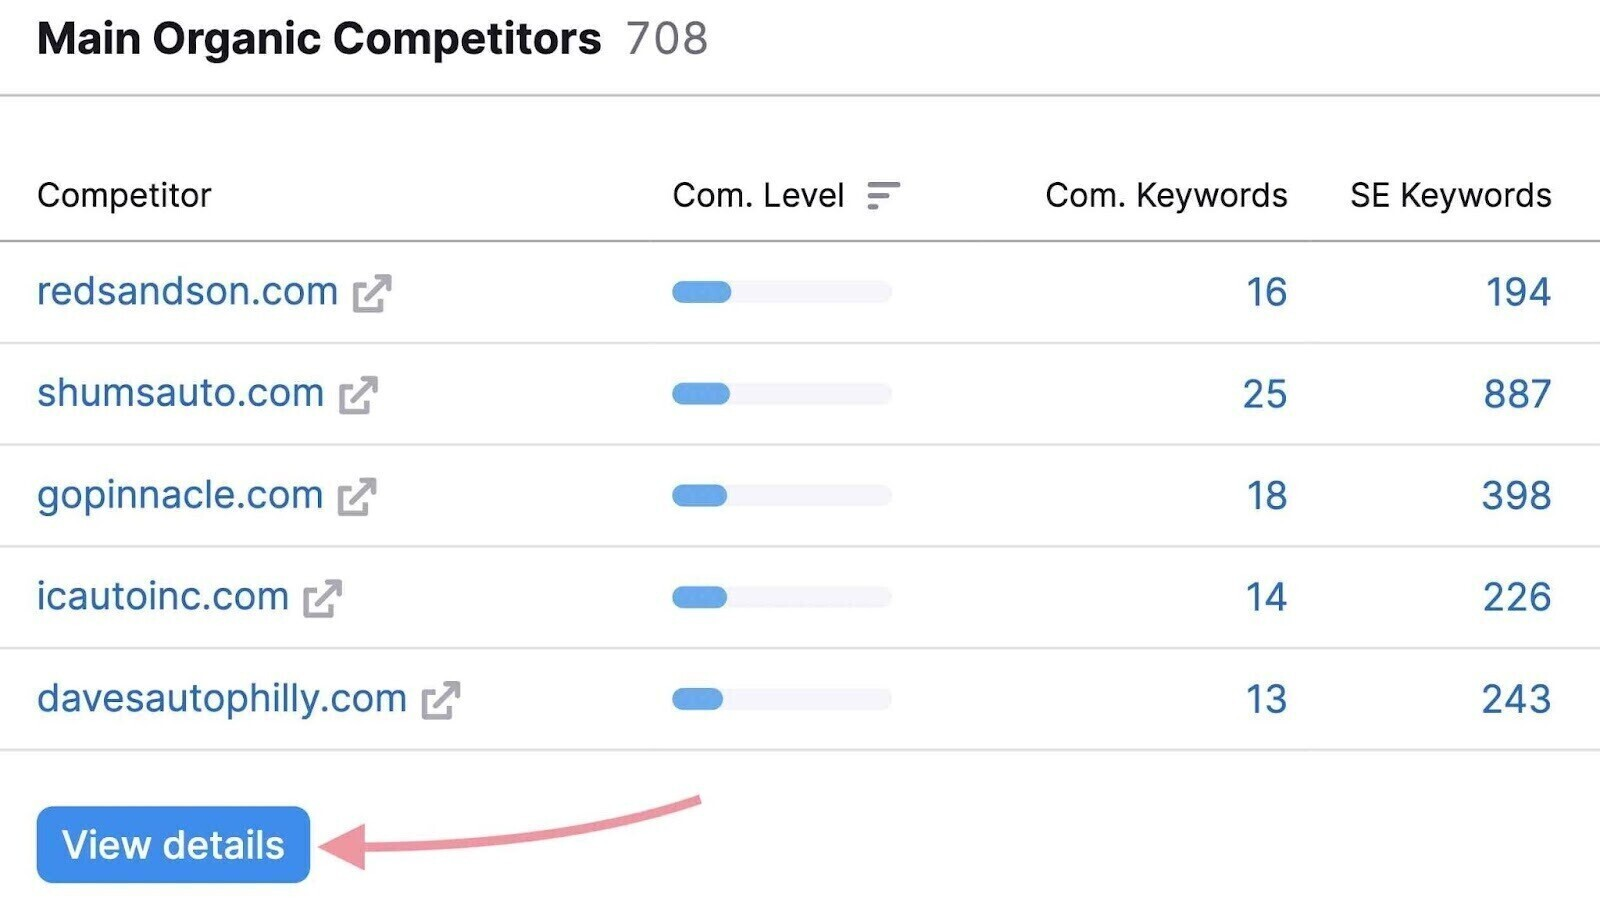 Main organic competitors with arrow to View details button.